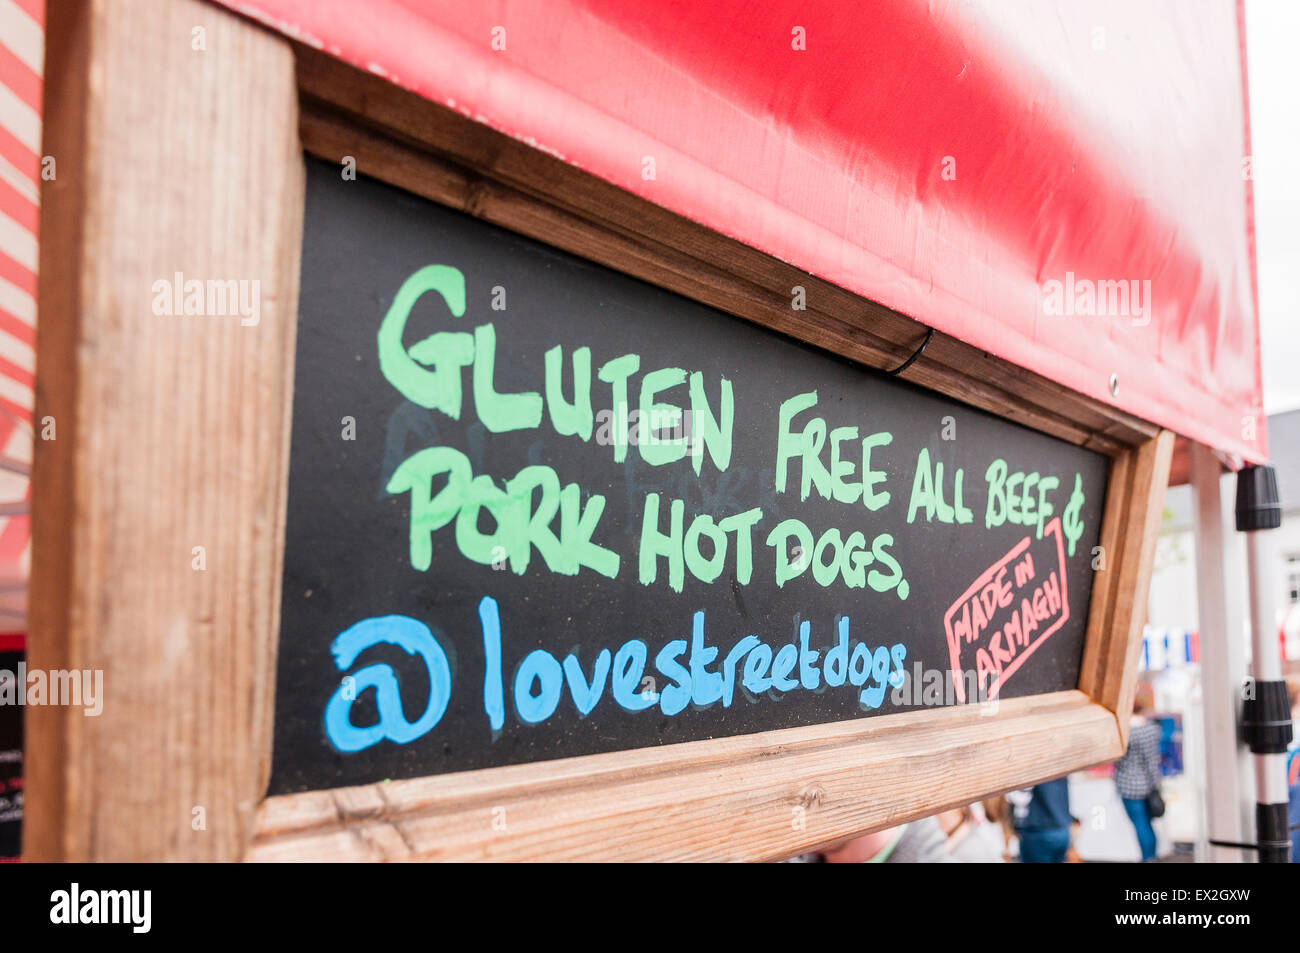 Sign advising that all beef and pork hotdogs are gluten free Stock Photo